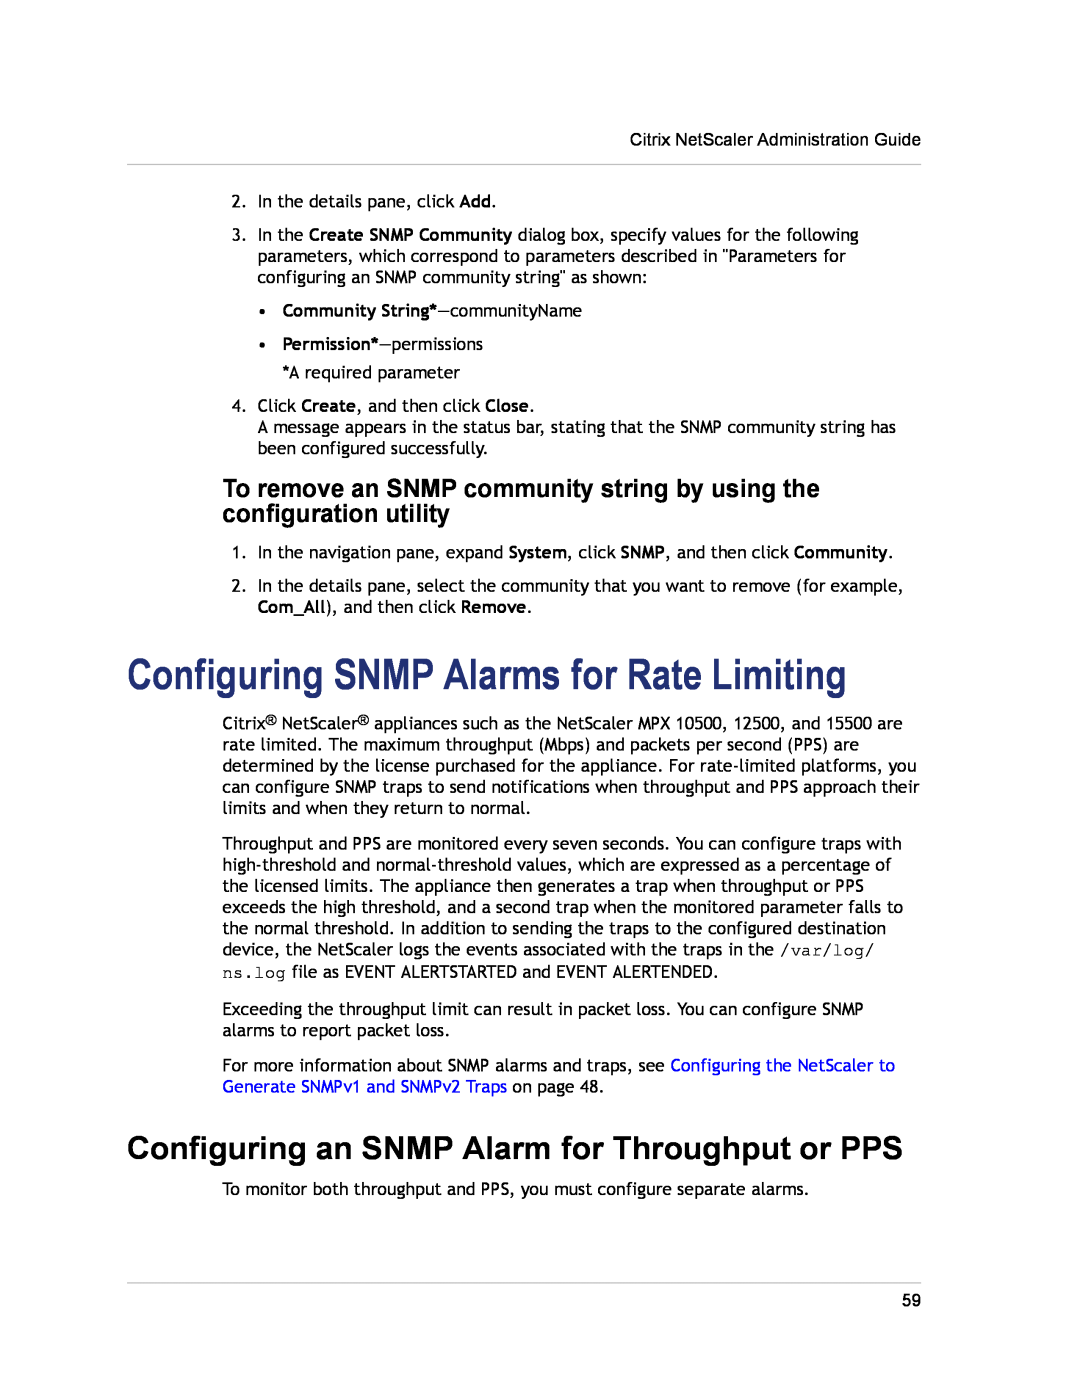 Citrix Systems CITRIX NETSCALER 9.3 manual Configuring SNMP Alarms for Rate Limiting, Community String*-communityName 